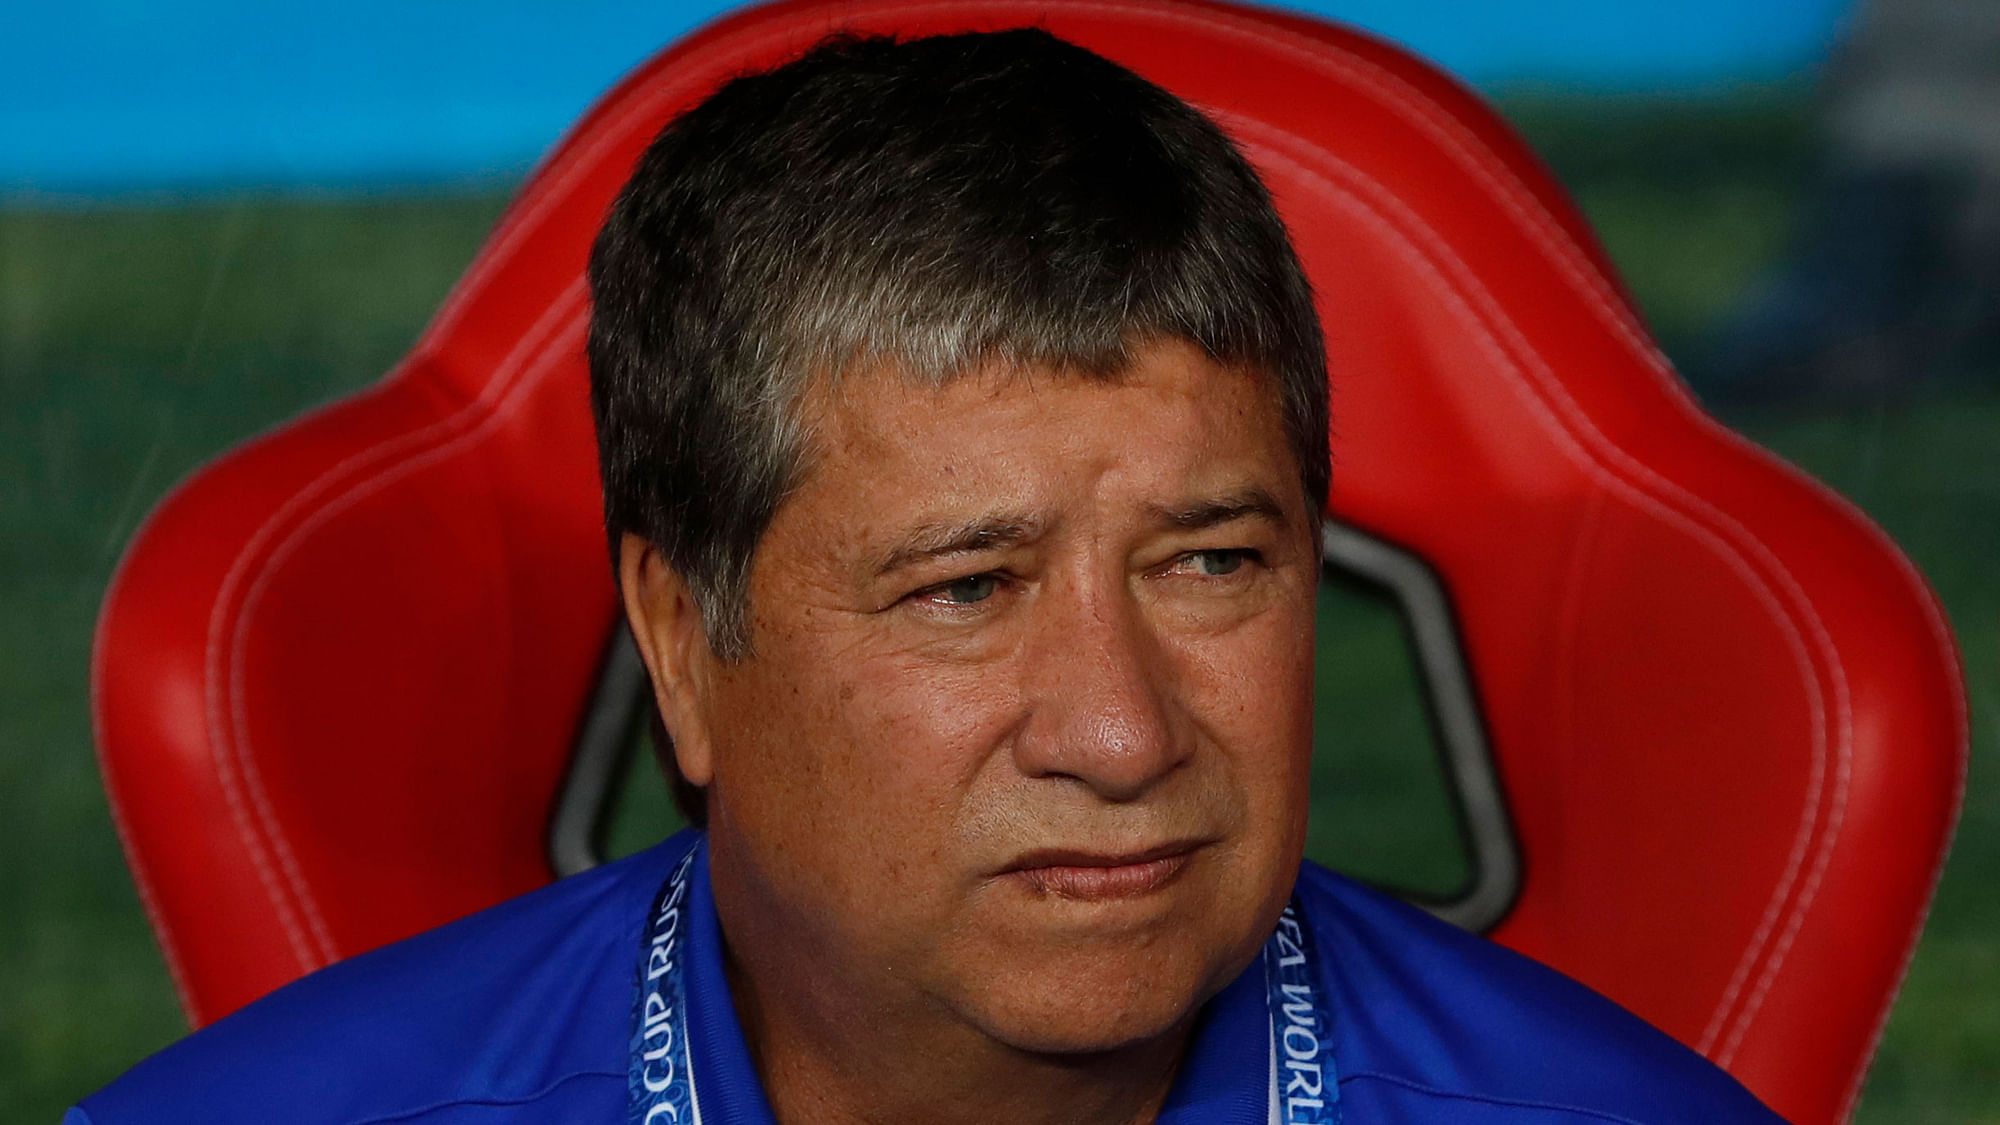 When asked why some were calling his team the worst at this World Cup, Panama coach Hernan Gomez got angry.